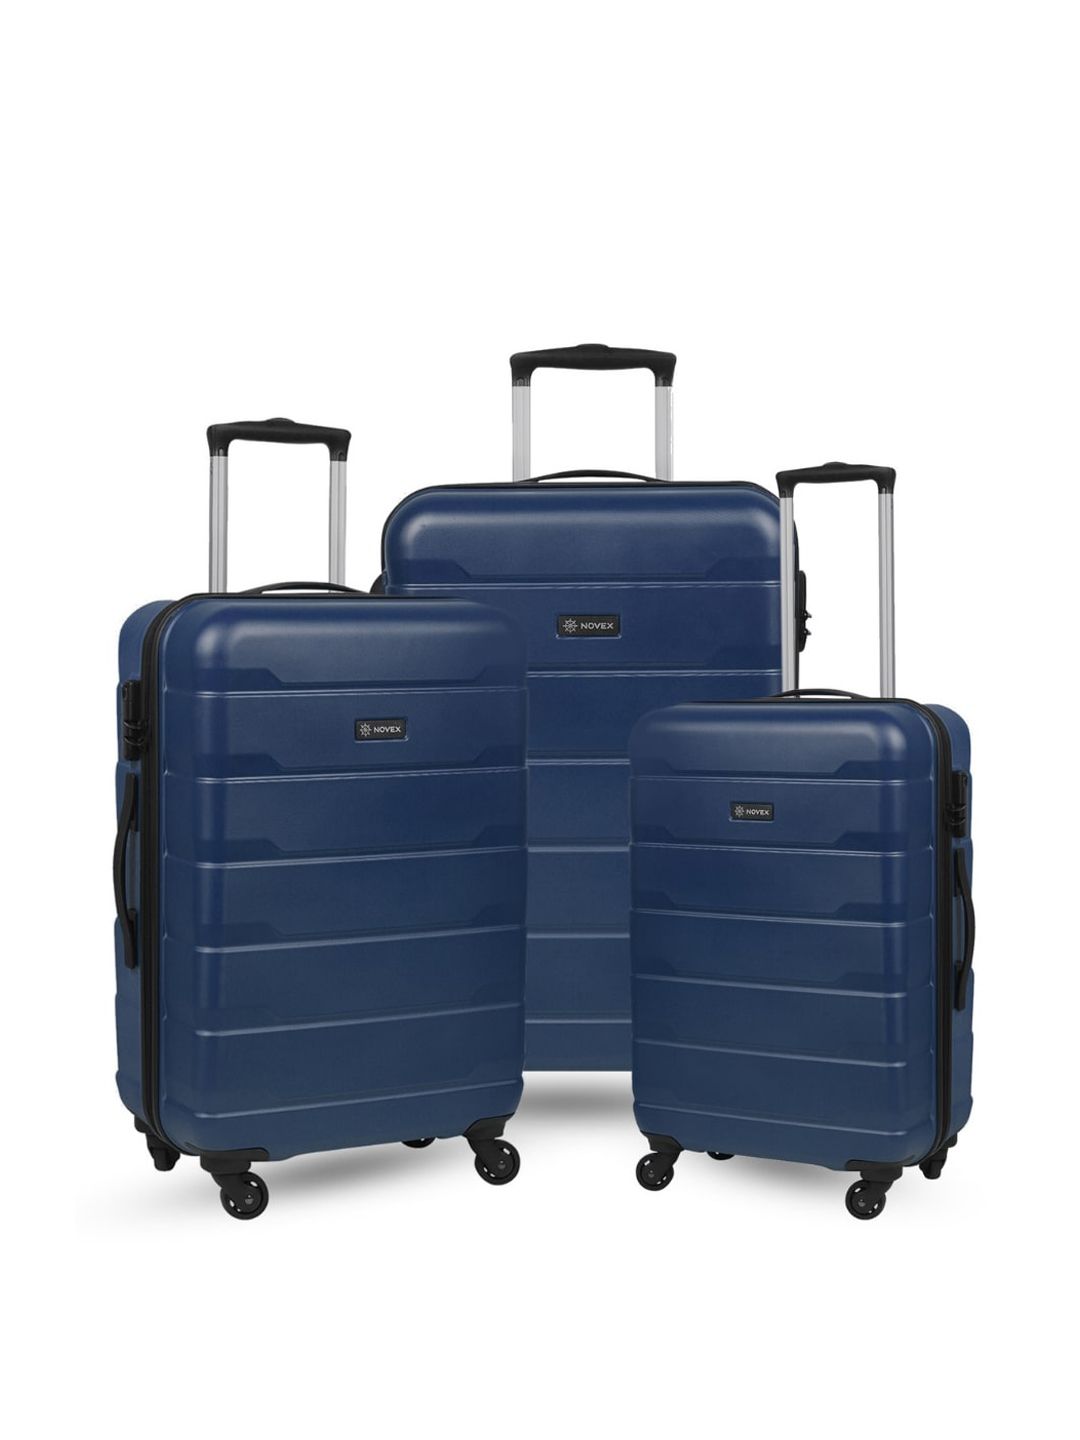 NOVEX Set Of 3 Navy Blue Solid Hard-Sided Dublin Trolley Suitcases Price in India